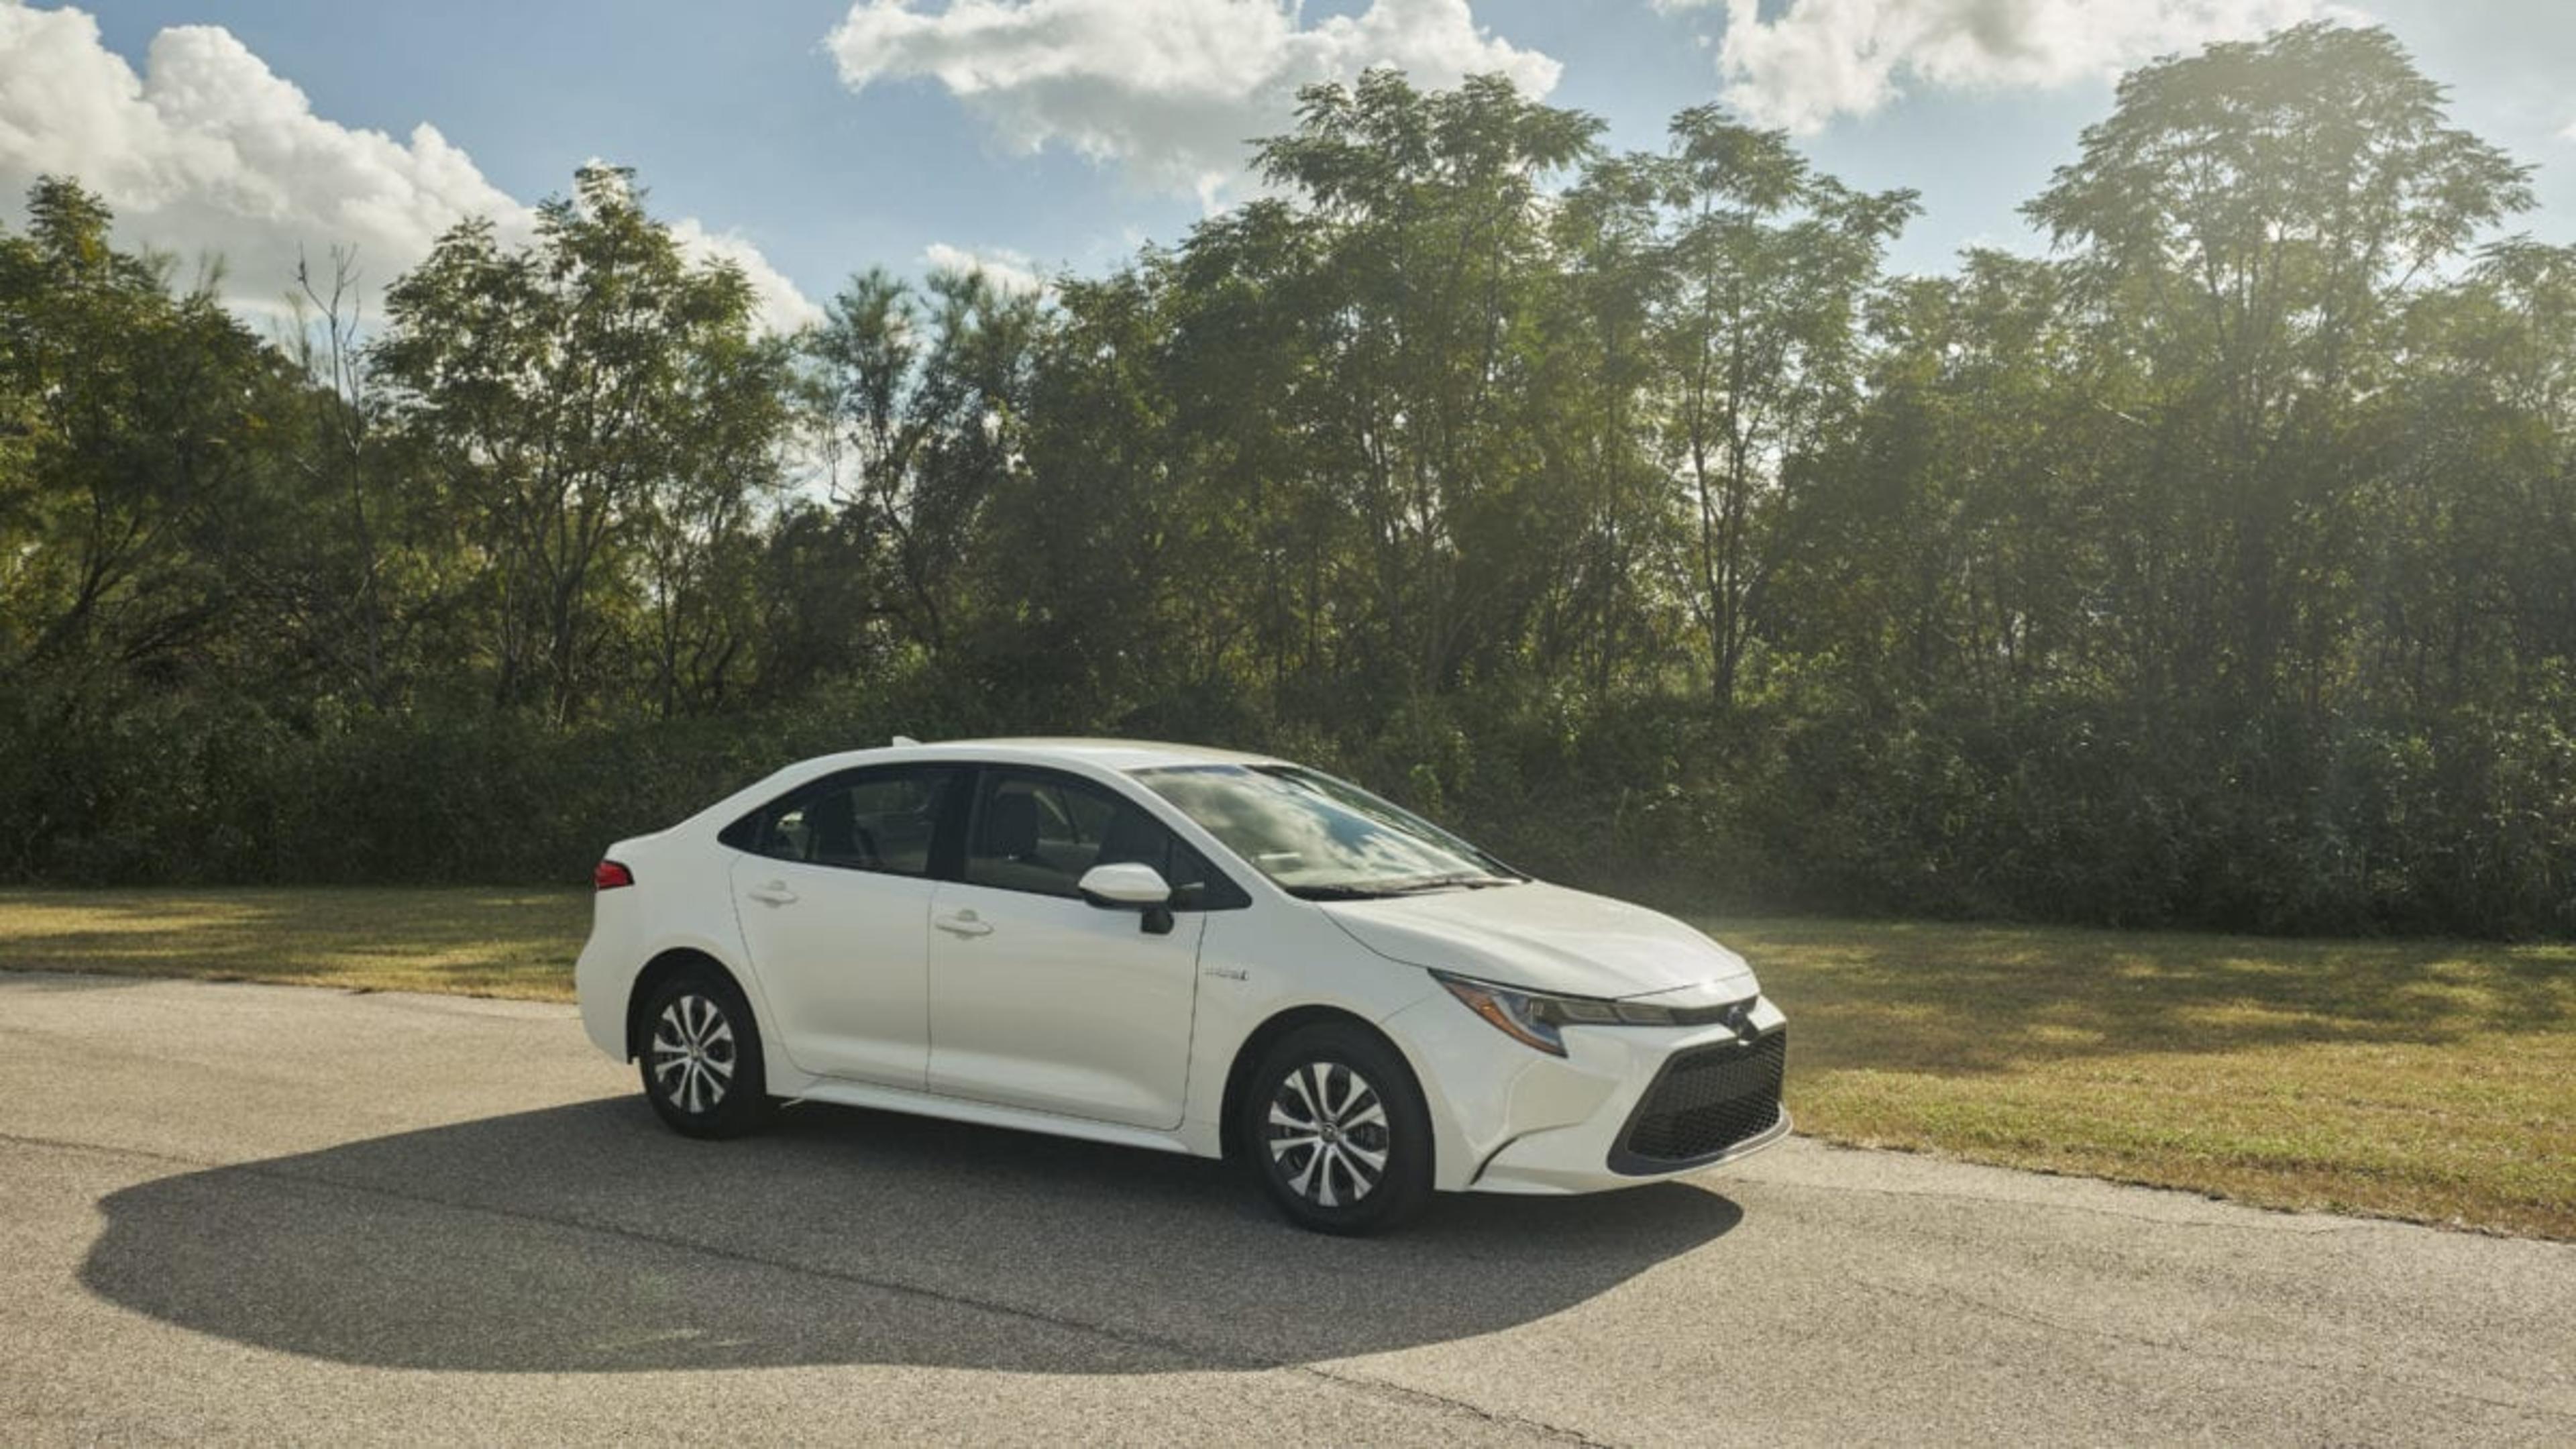 ALL-NEW COROLLA SEDAN OFFERS STYLE, SAFETY AND A HYBRID FIRST featured image